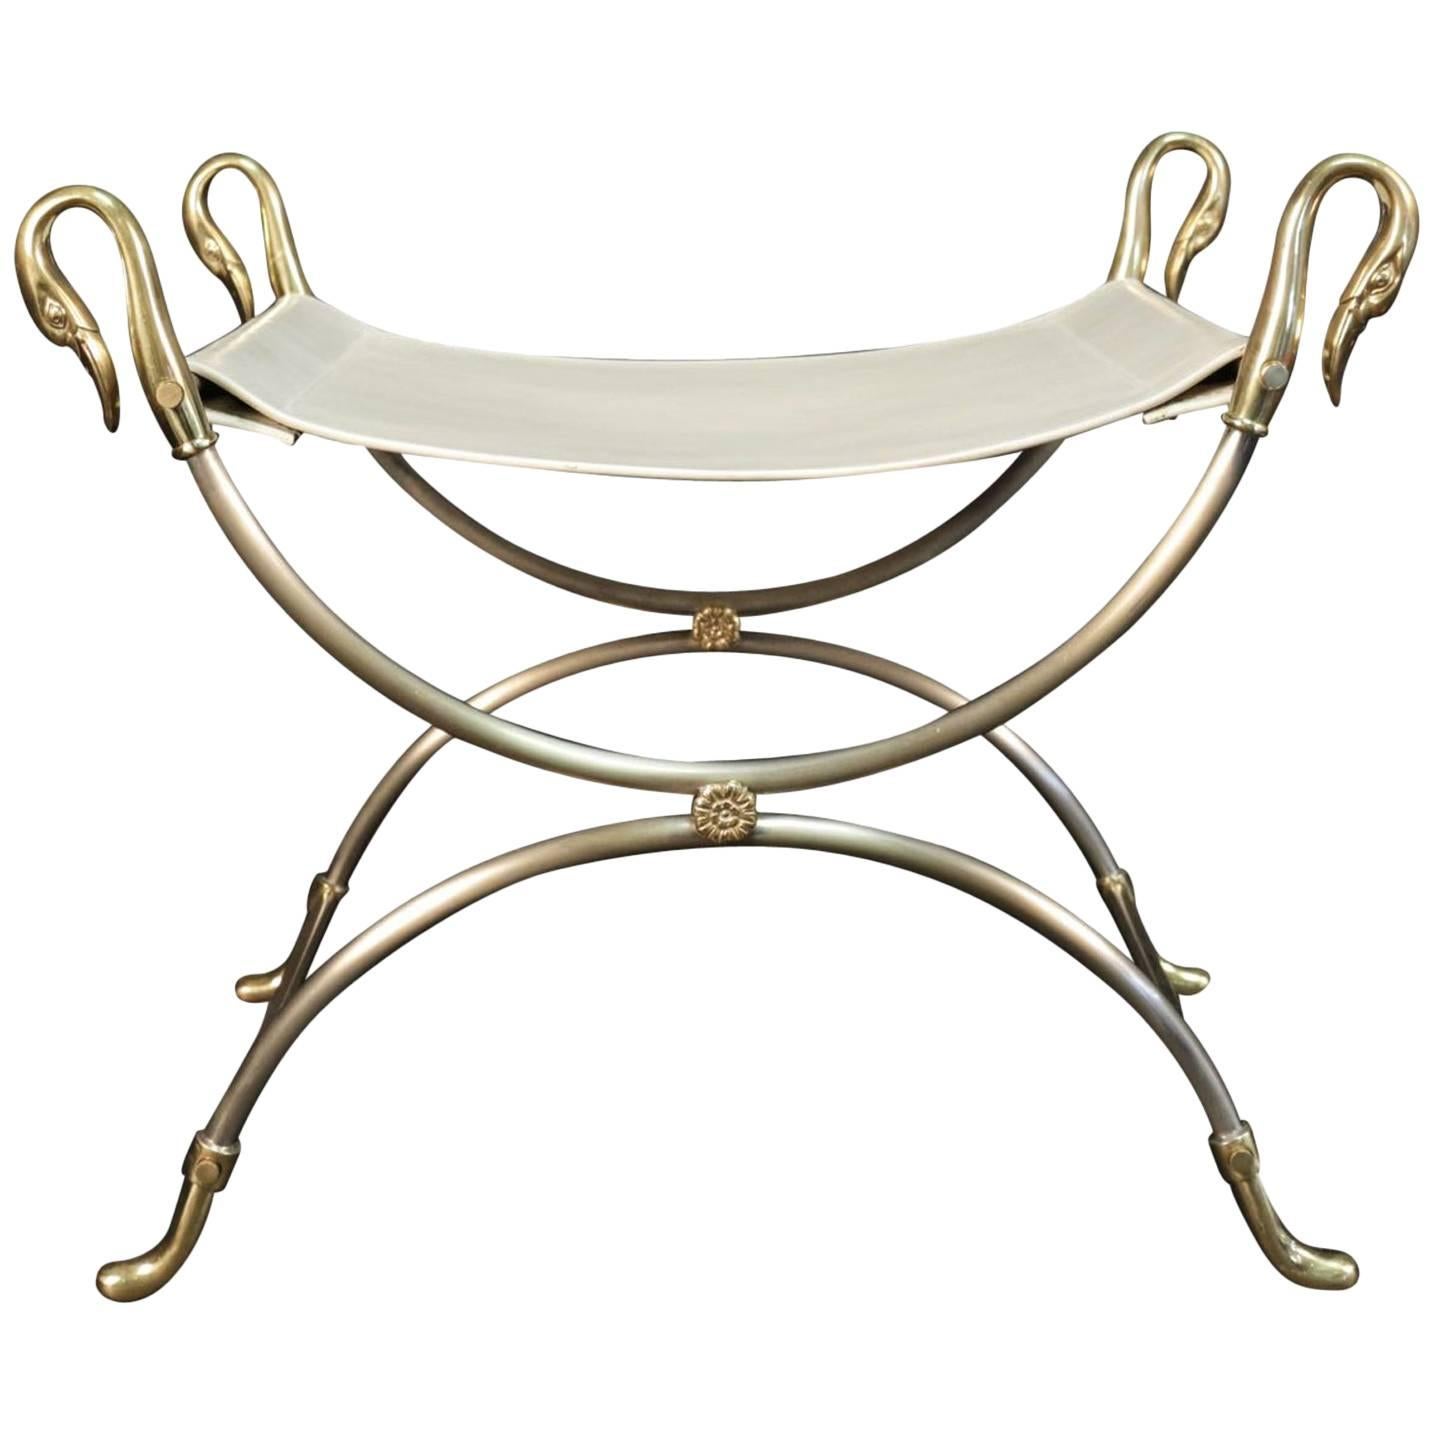 1970s Curule and Bronze Stool "Swans" Model by Maison Charles